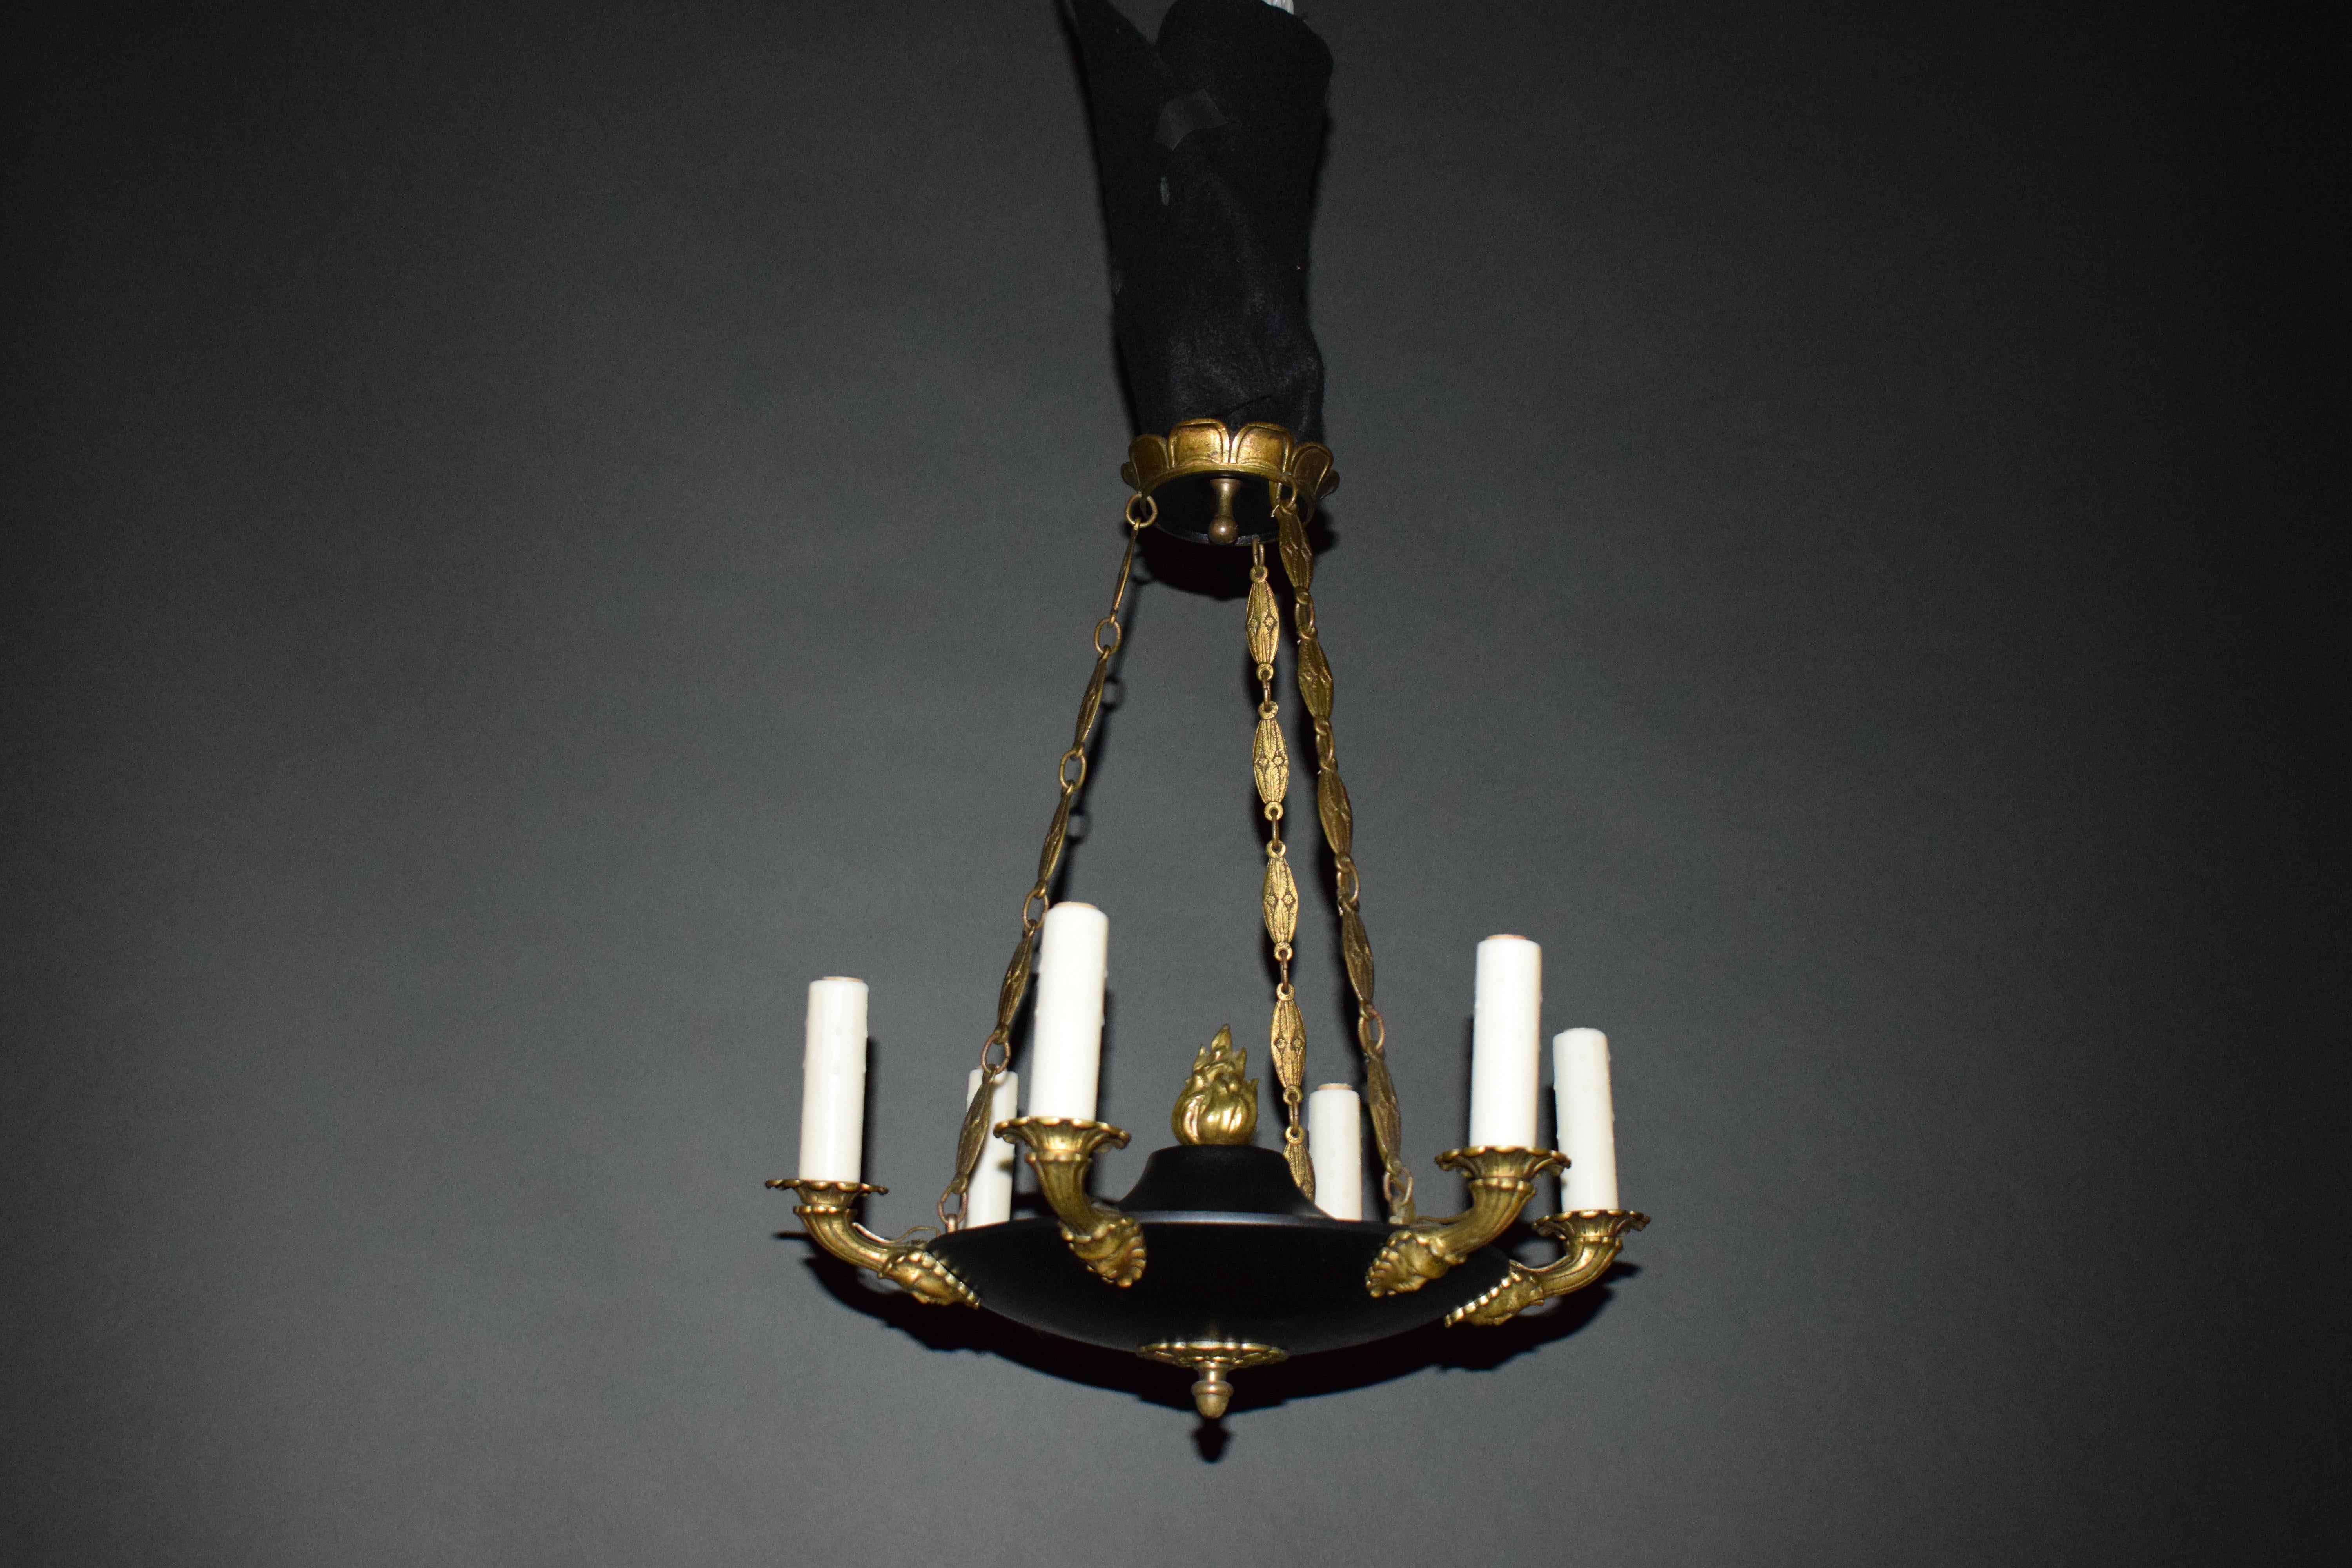 A fine and elegant Empire style chandelier. France, circa 1910. 6 lights
Dimensions: 21.5